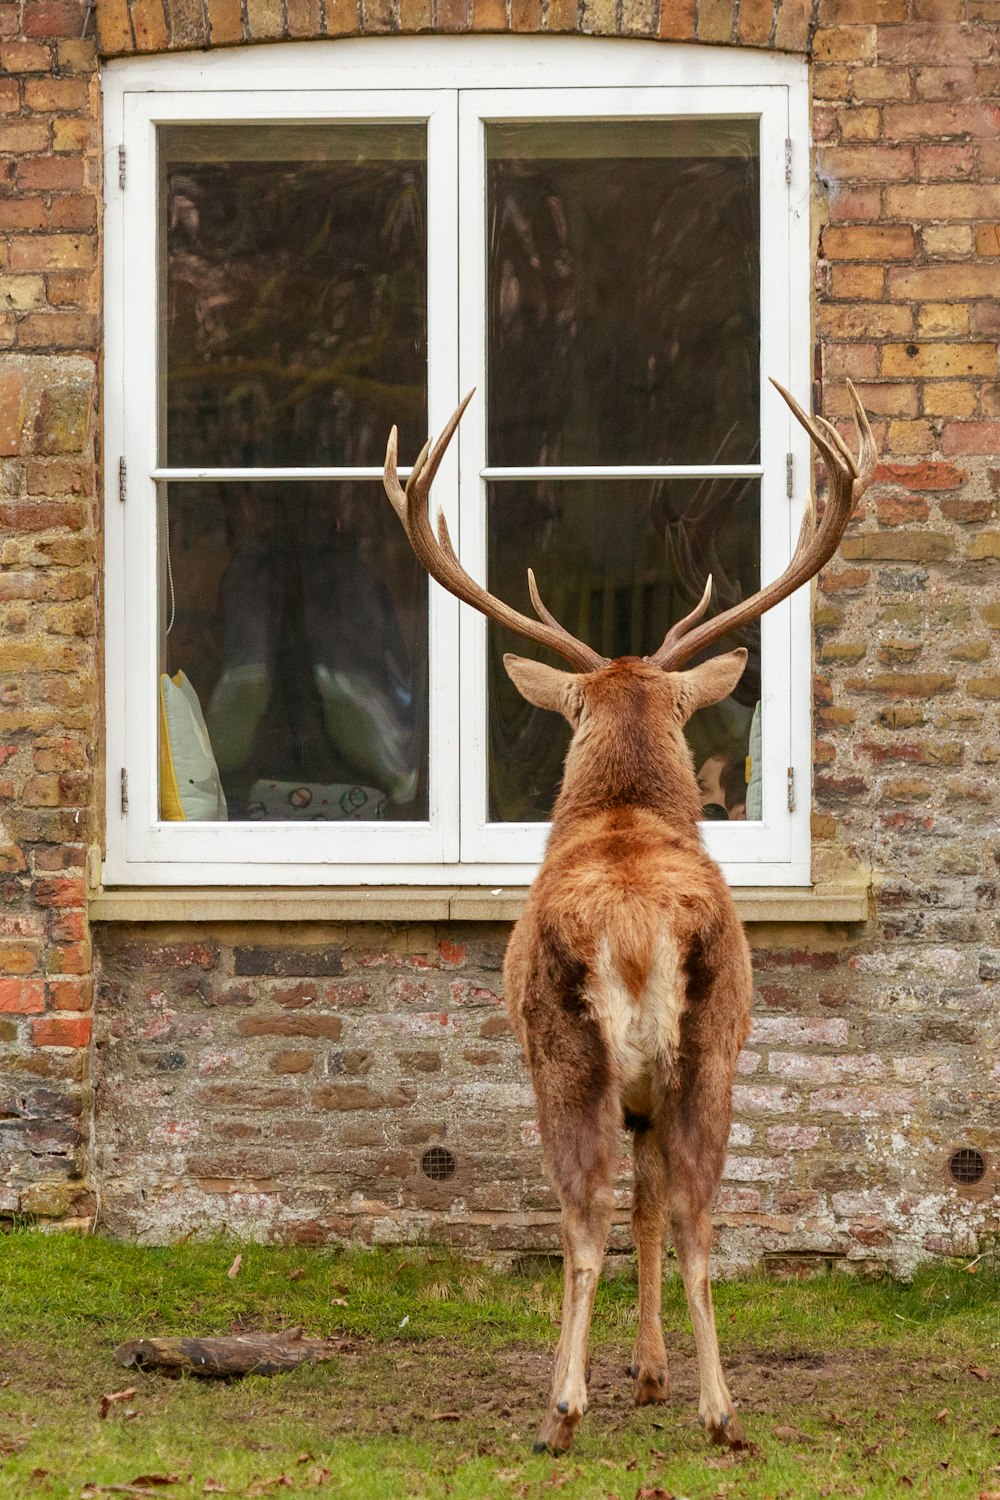 a deer standing in front of a brick building